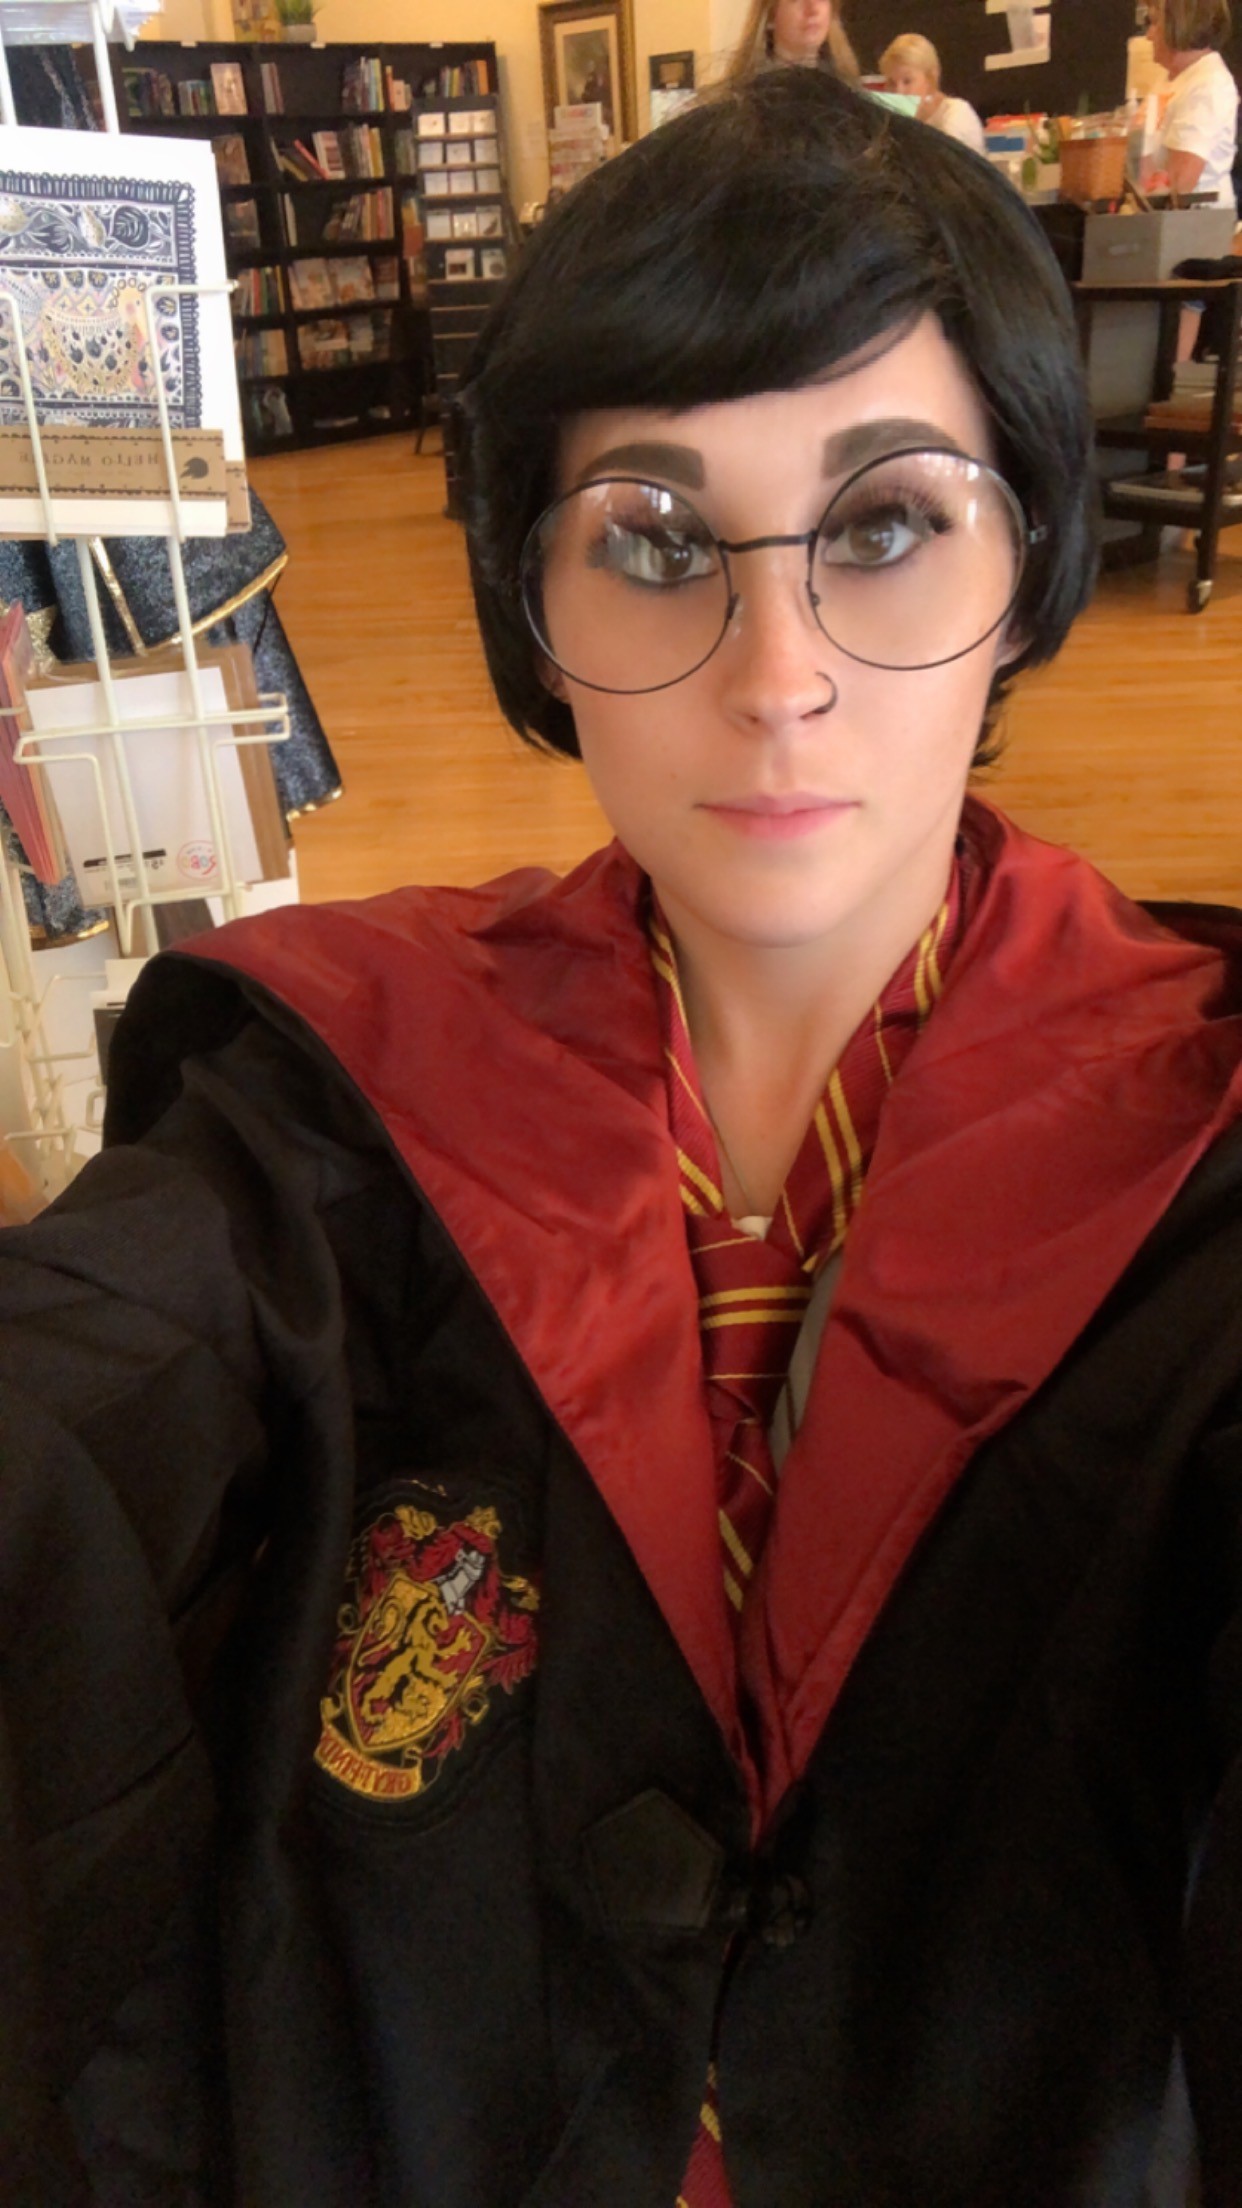 Kolina dressed as Harry Potter for  the party